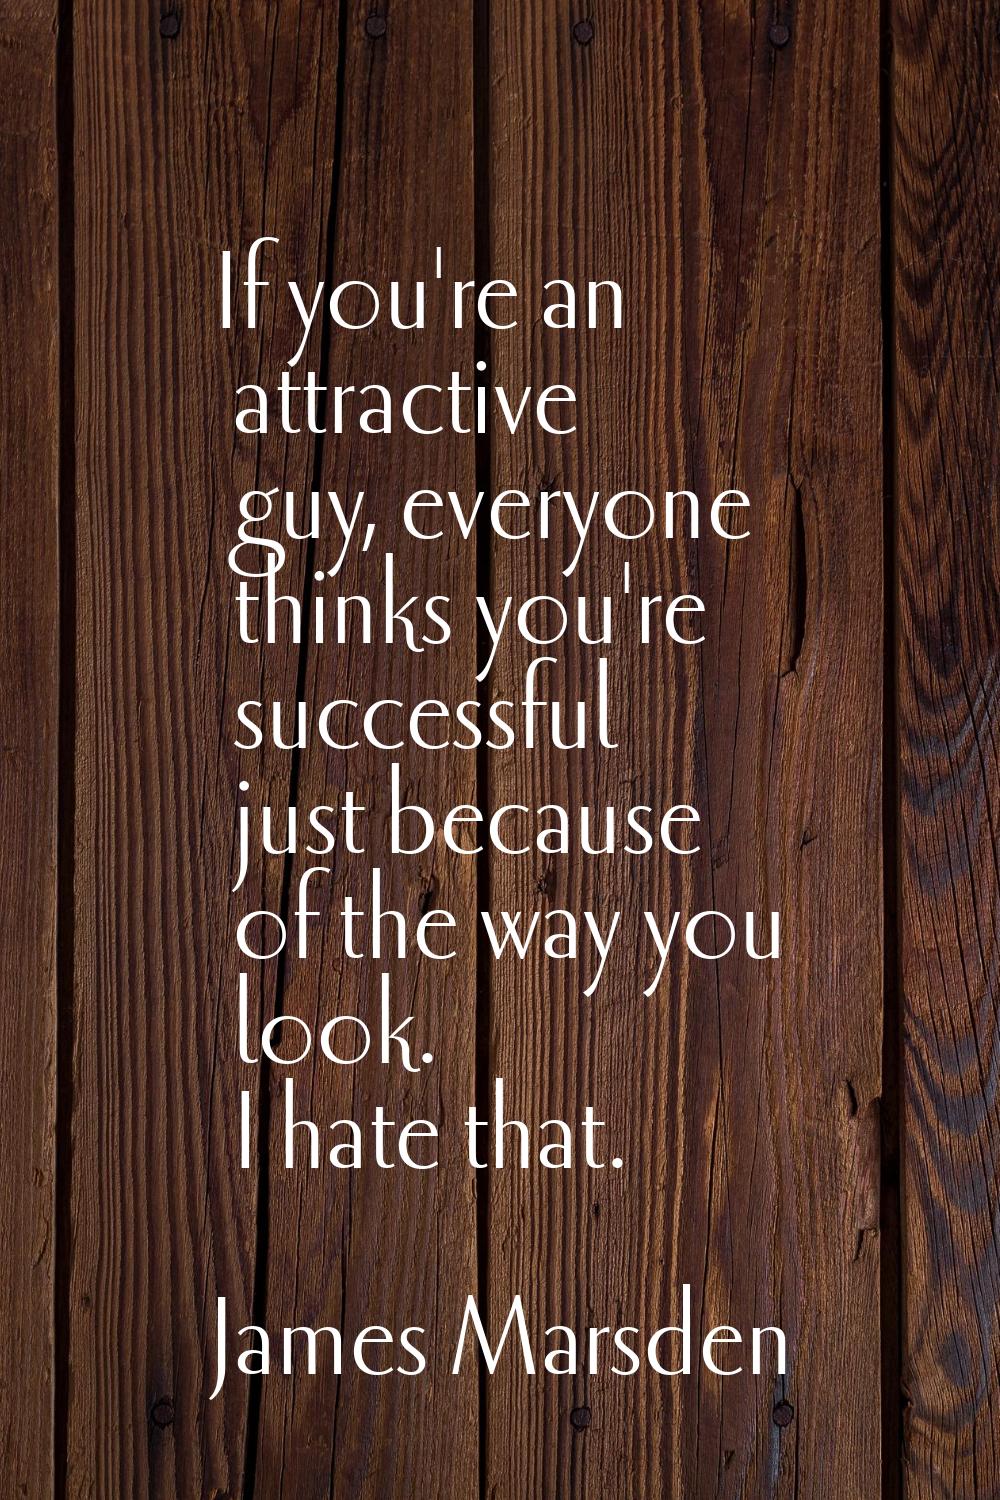 If you're an attractive guy, everyone thinks you're successful just because of the way you look. I 